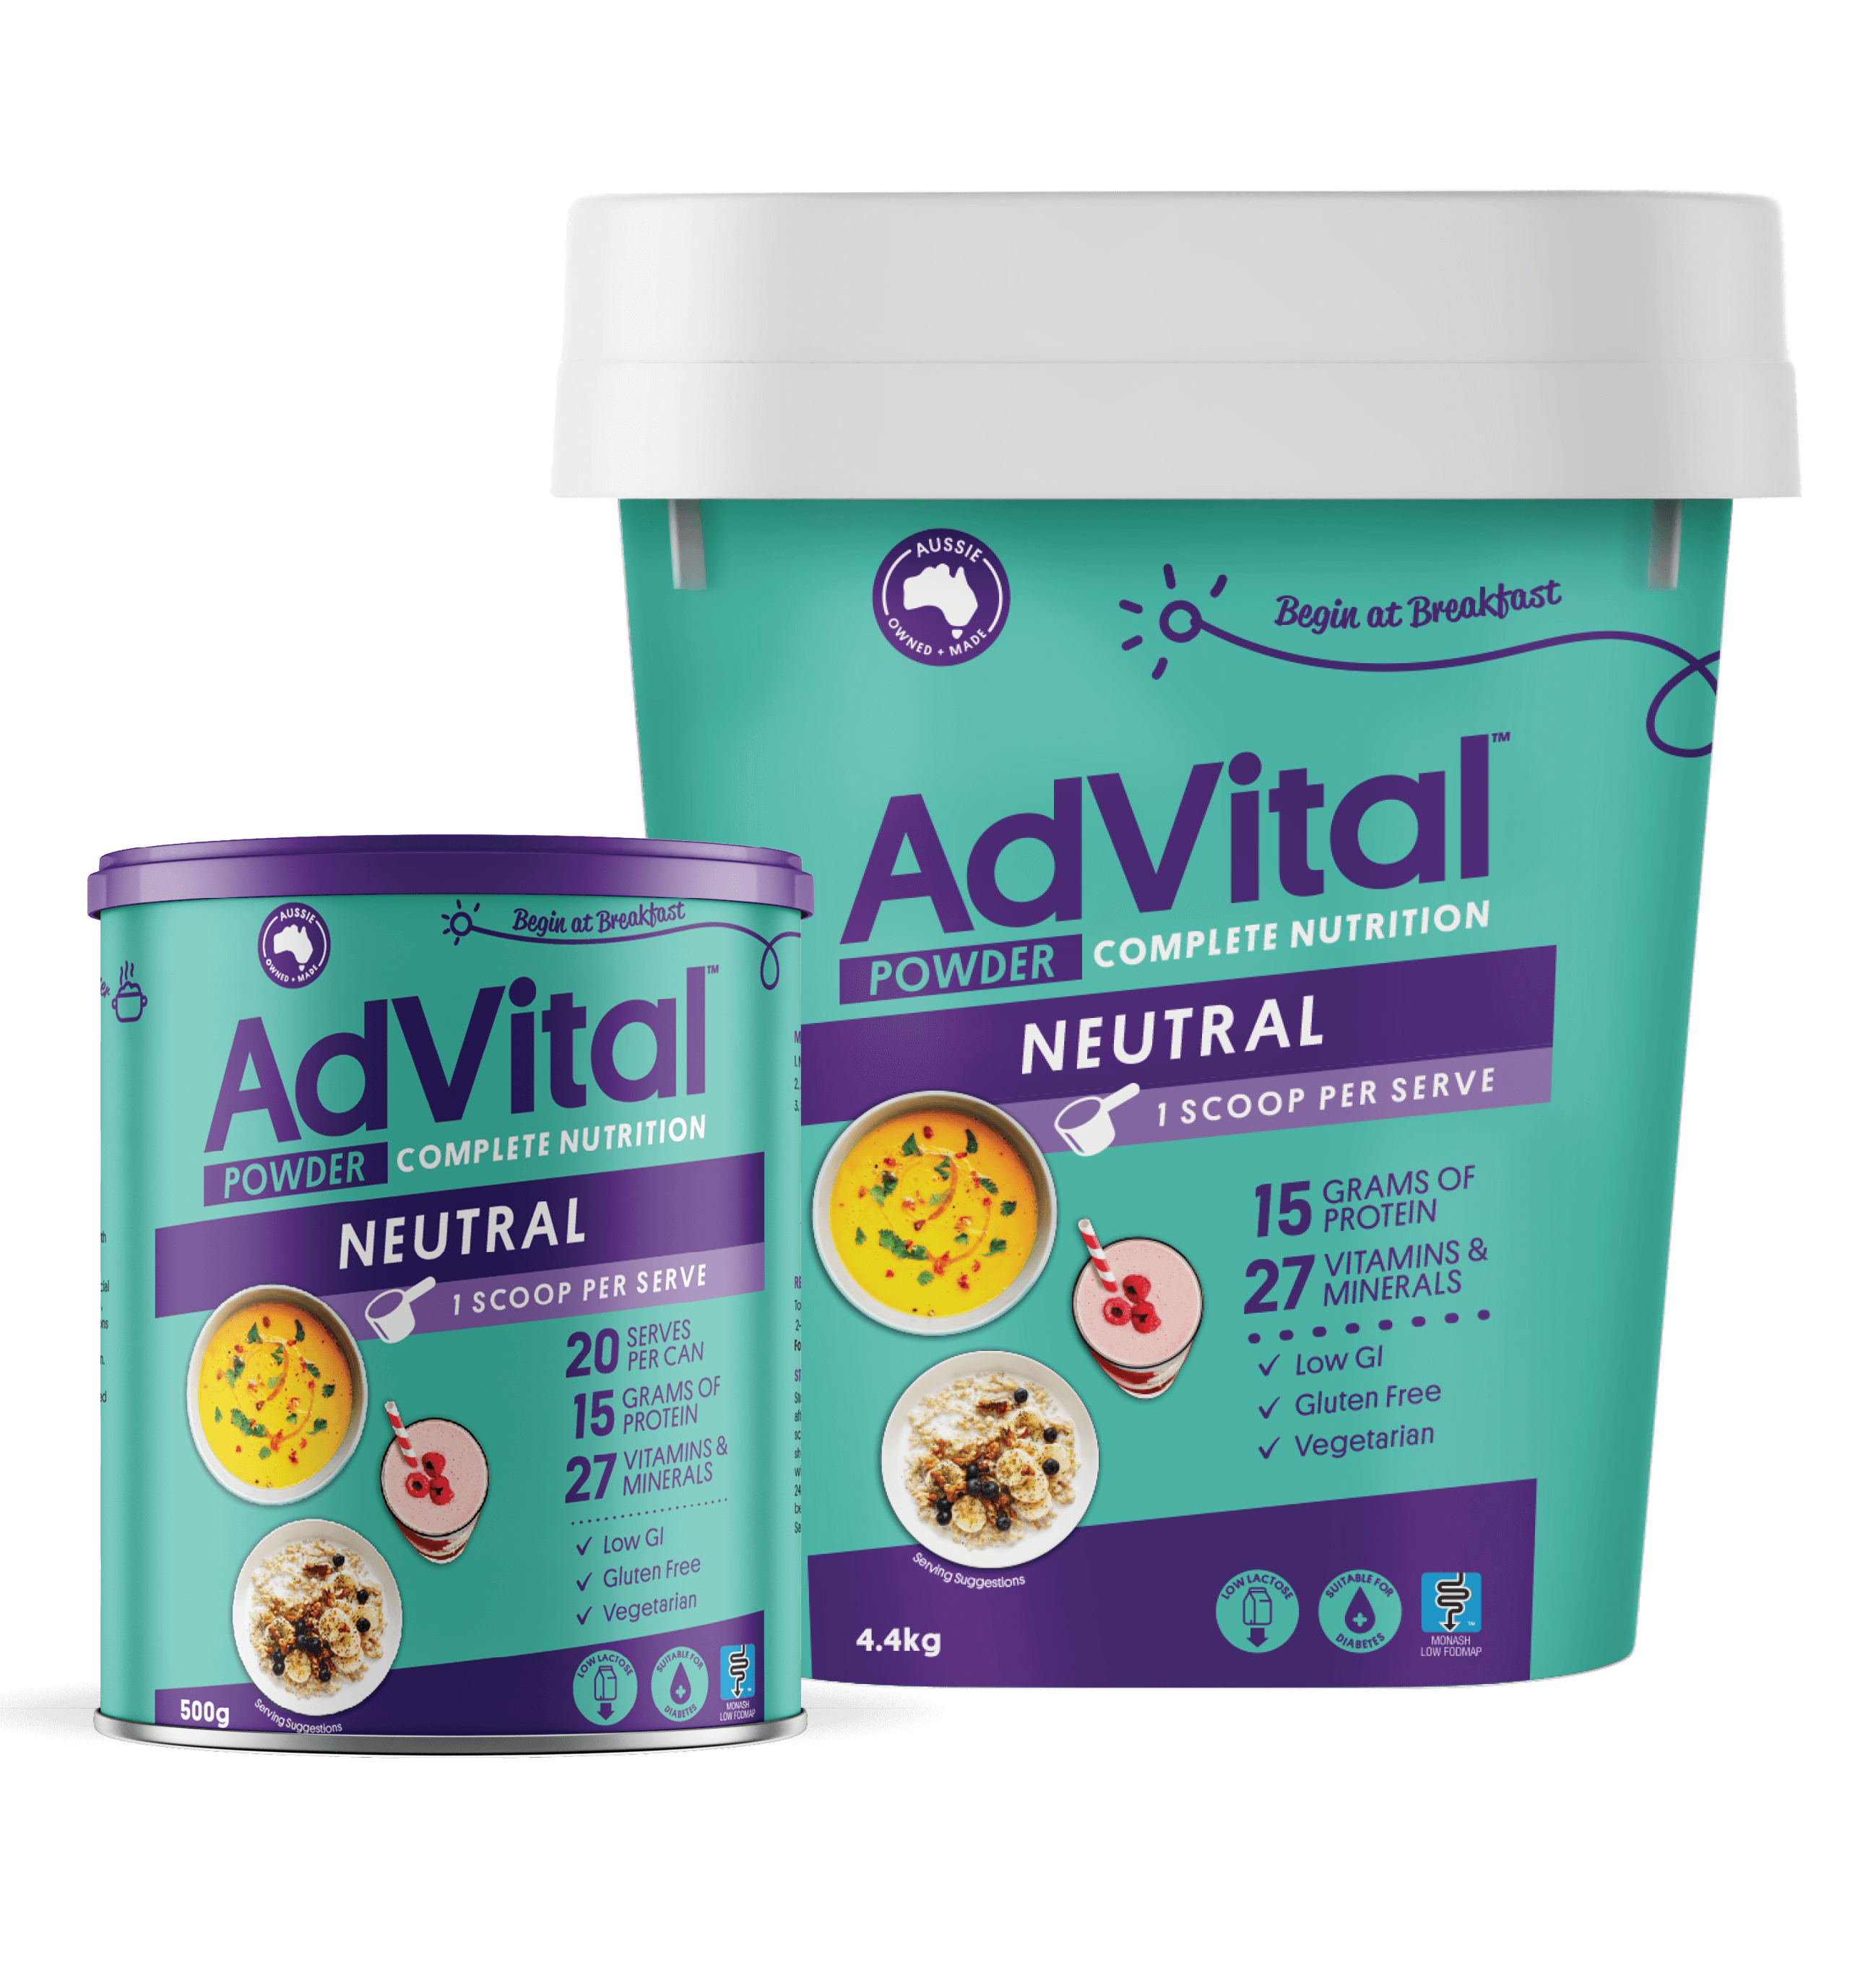 About - AdVital